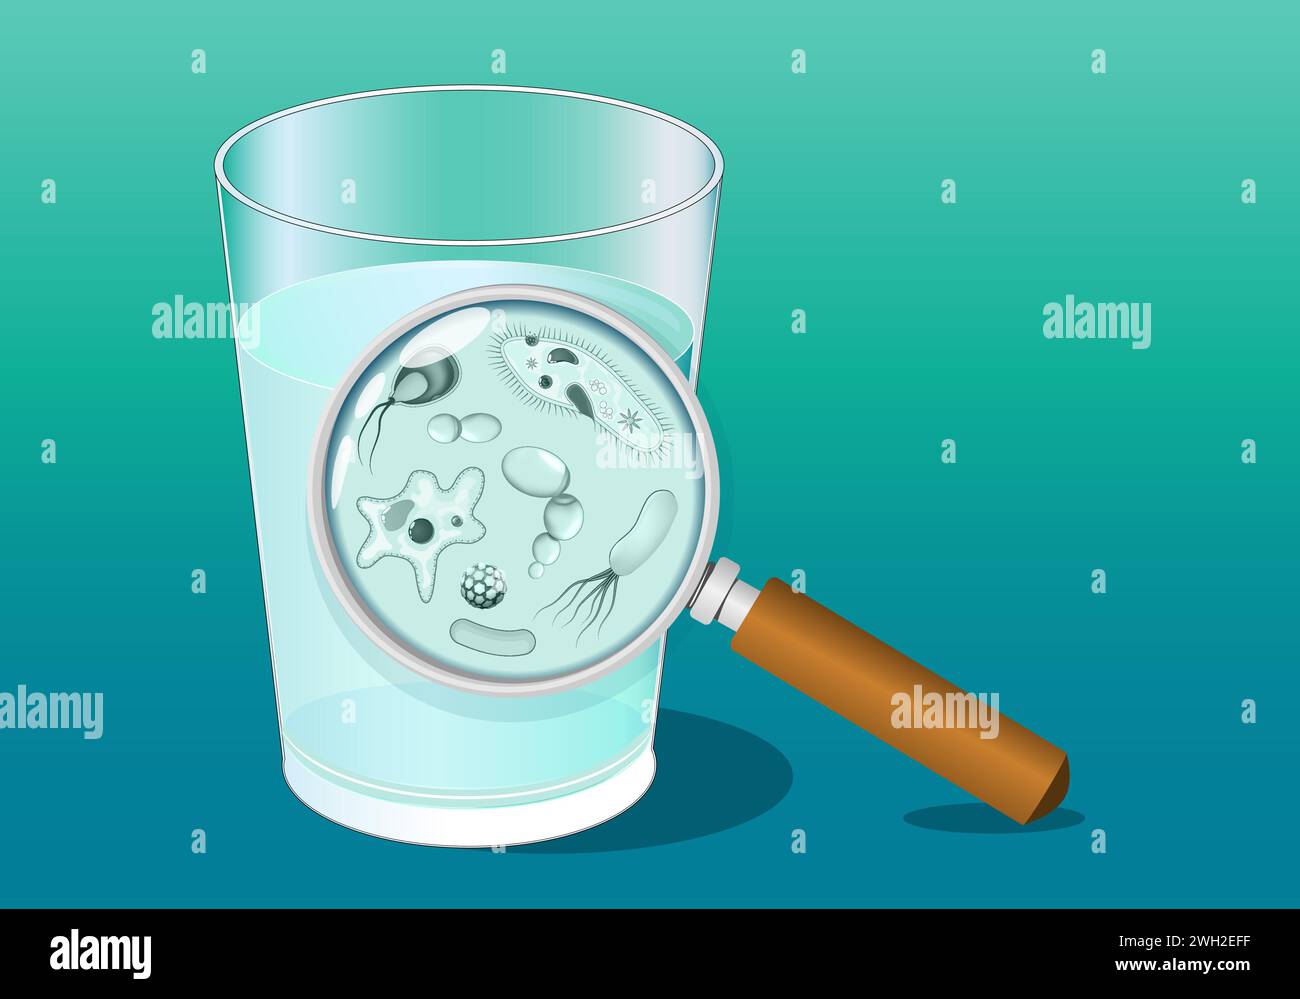 A glass of water and magnifying glass. Close-up of water microbe. Microbial contamination. Waterborne pathogens. Drinking water quality and safety bef Stock Vector